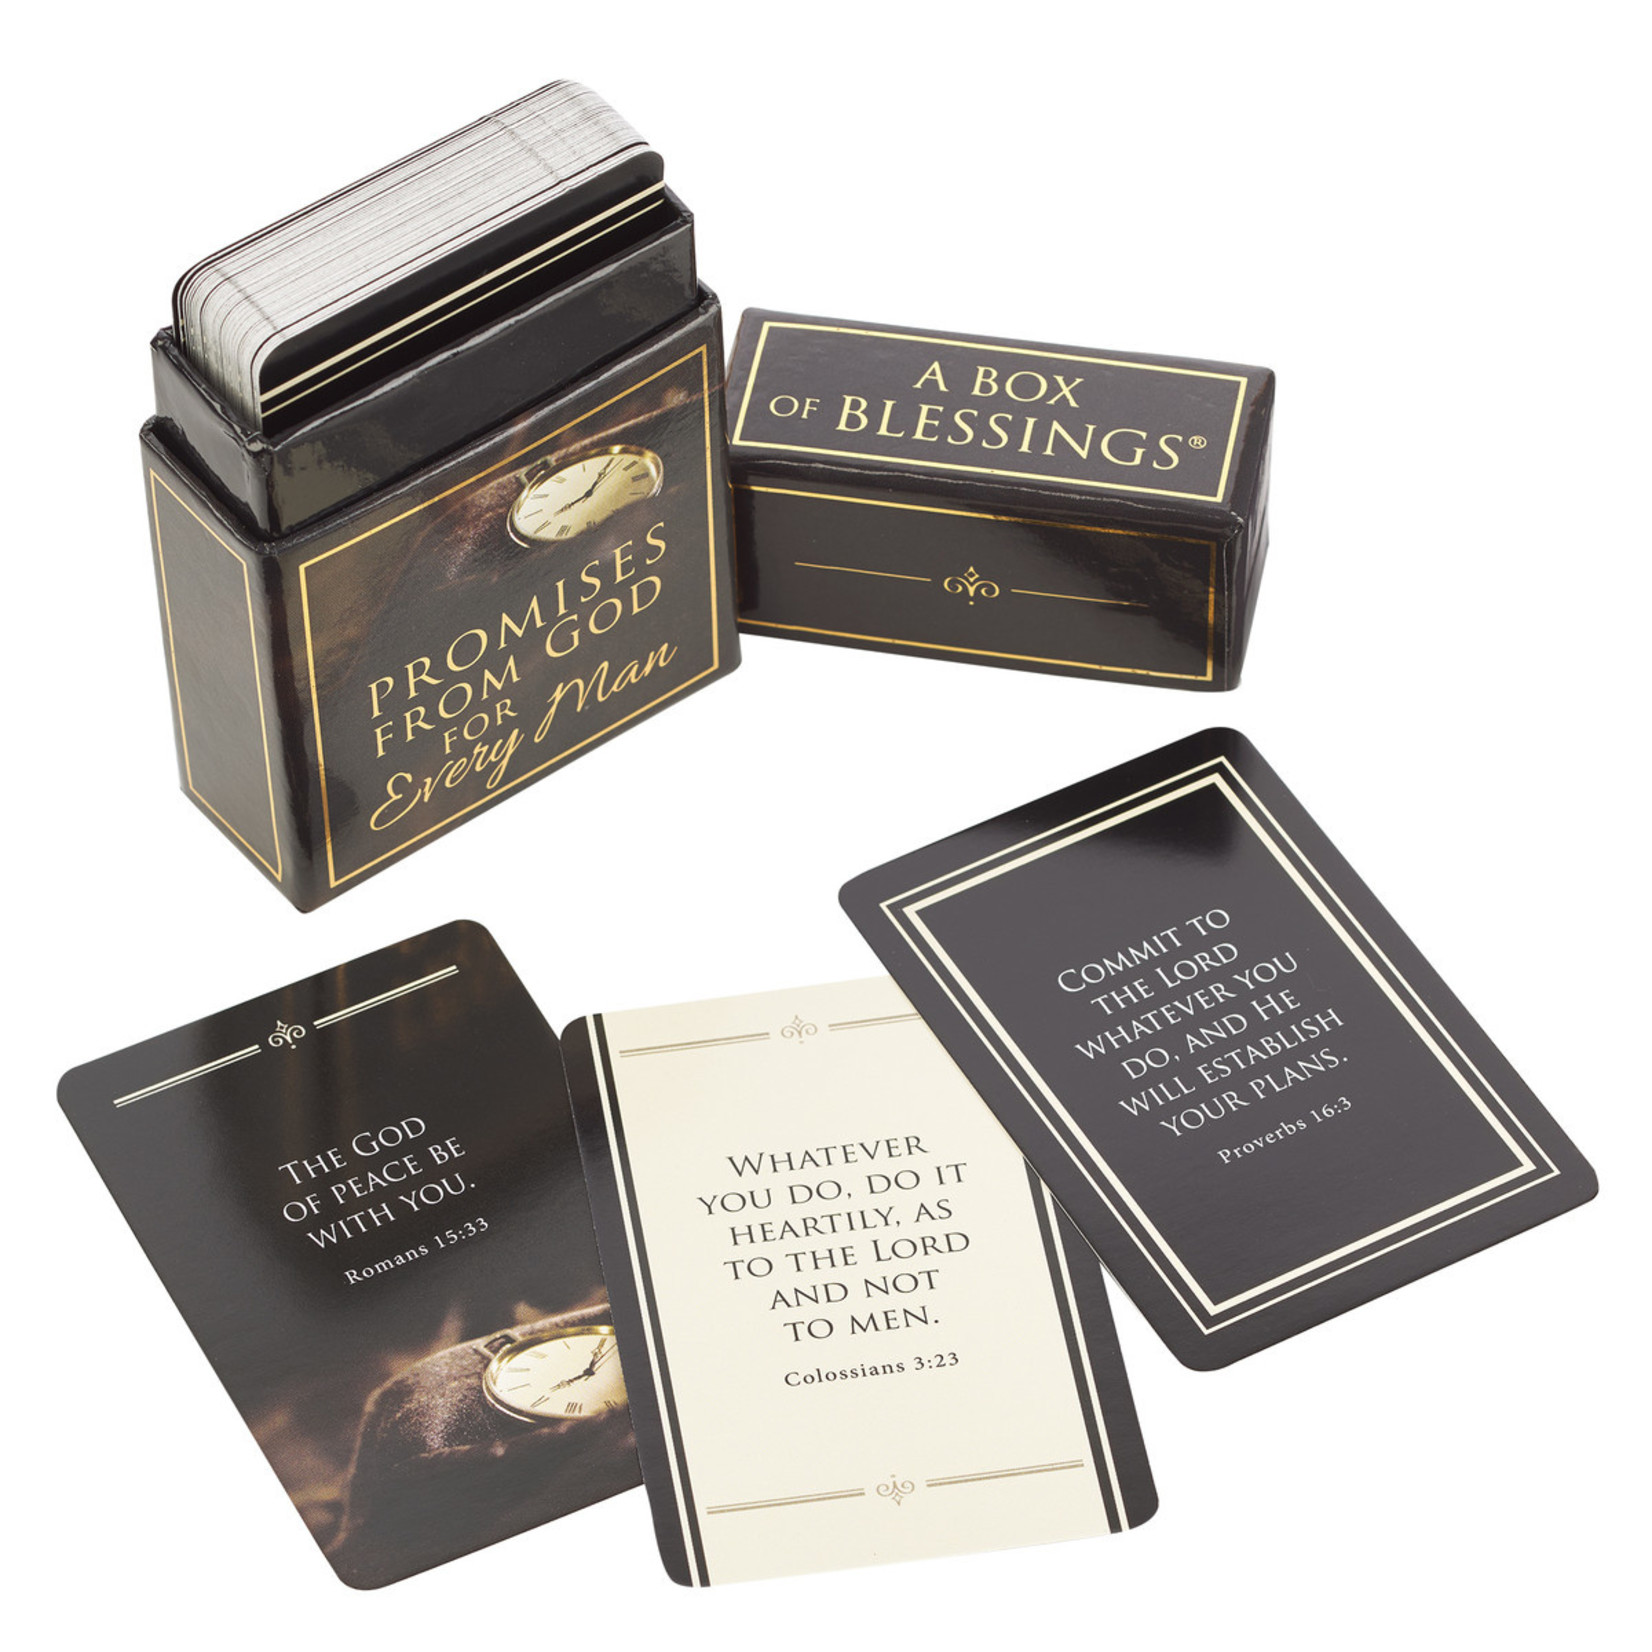 Christian Art Gifts Promises From God For Every Man - Box of Blessings®